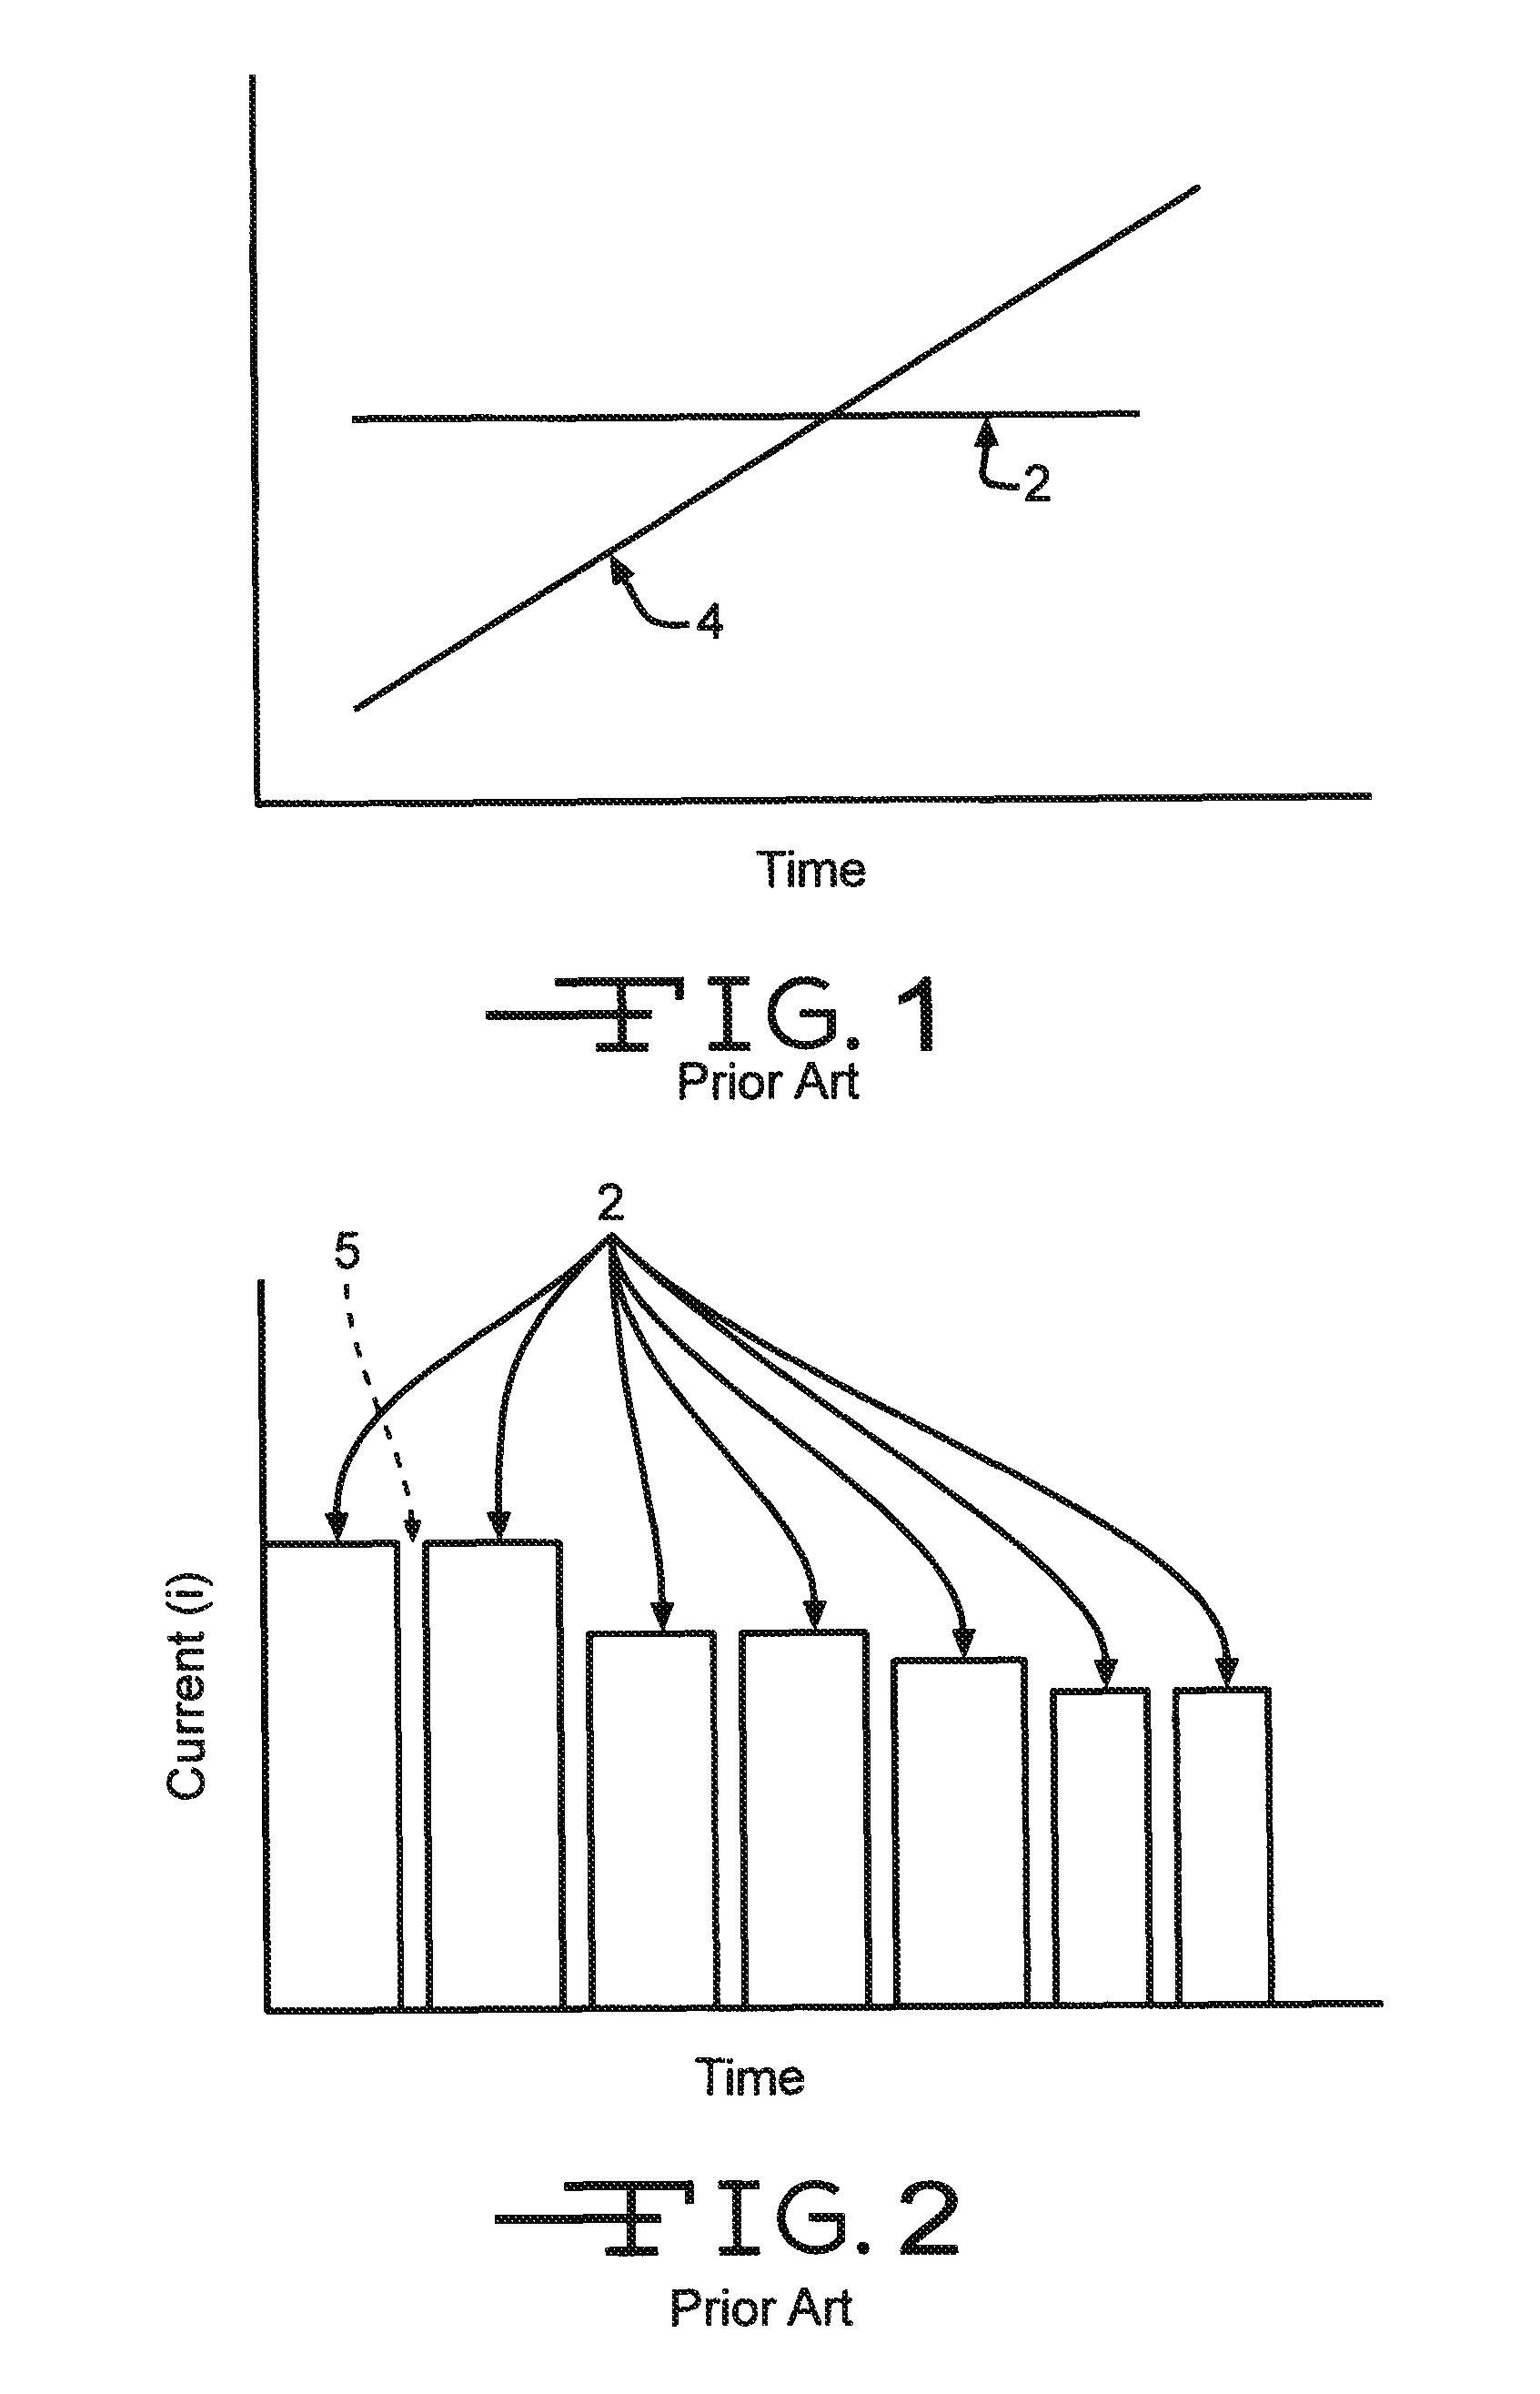 Anodizing valve metals by self-adjusted current and power